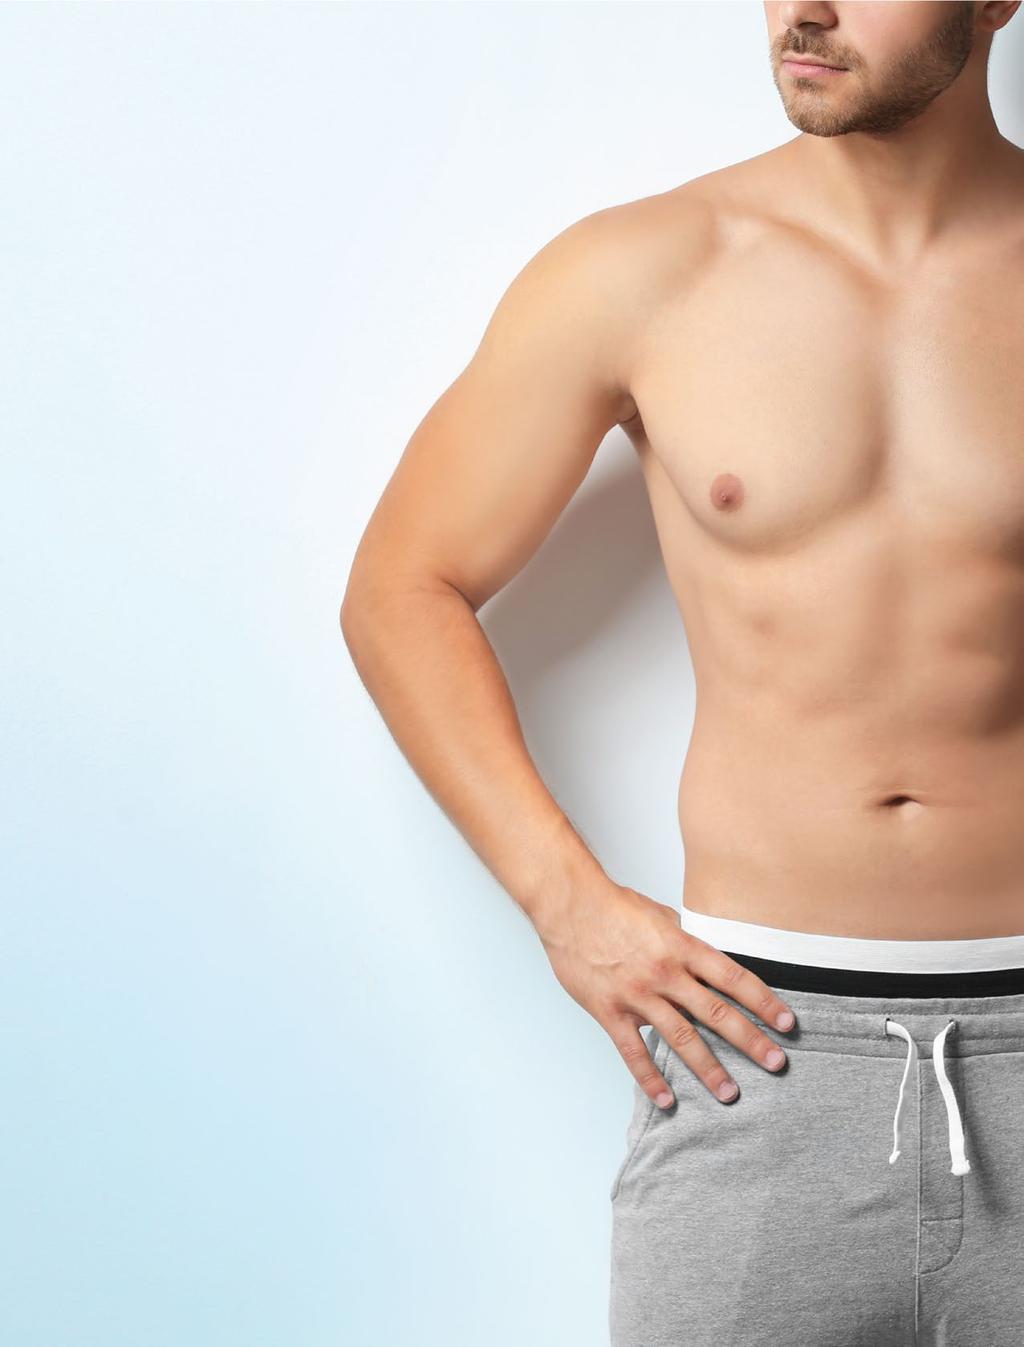 What Will Happen After Treatment? You may experience a minimal amount of tenderness, swelling or bruising after the CoolSculpting process, though many patients have none of these.